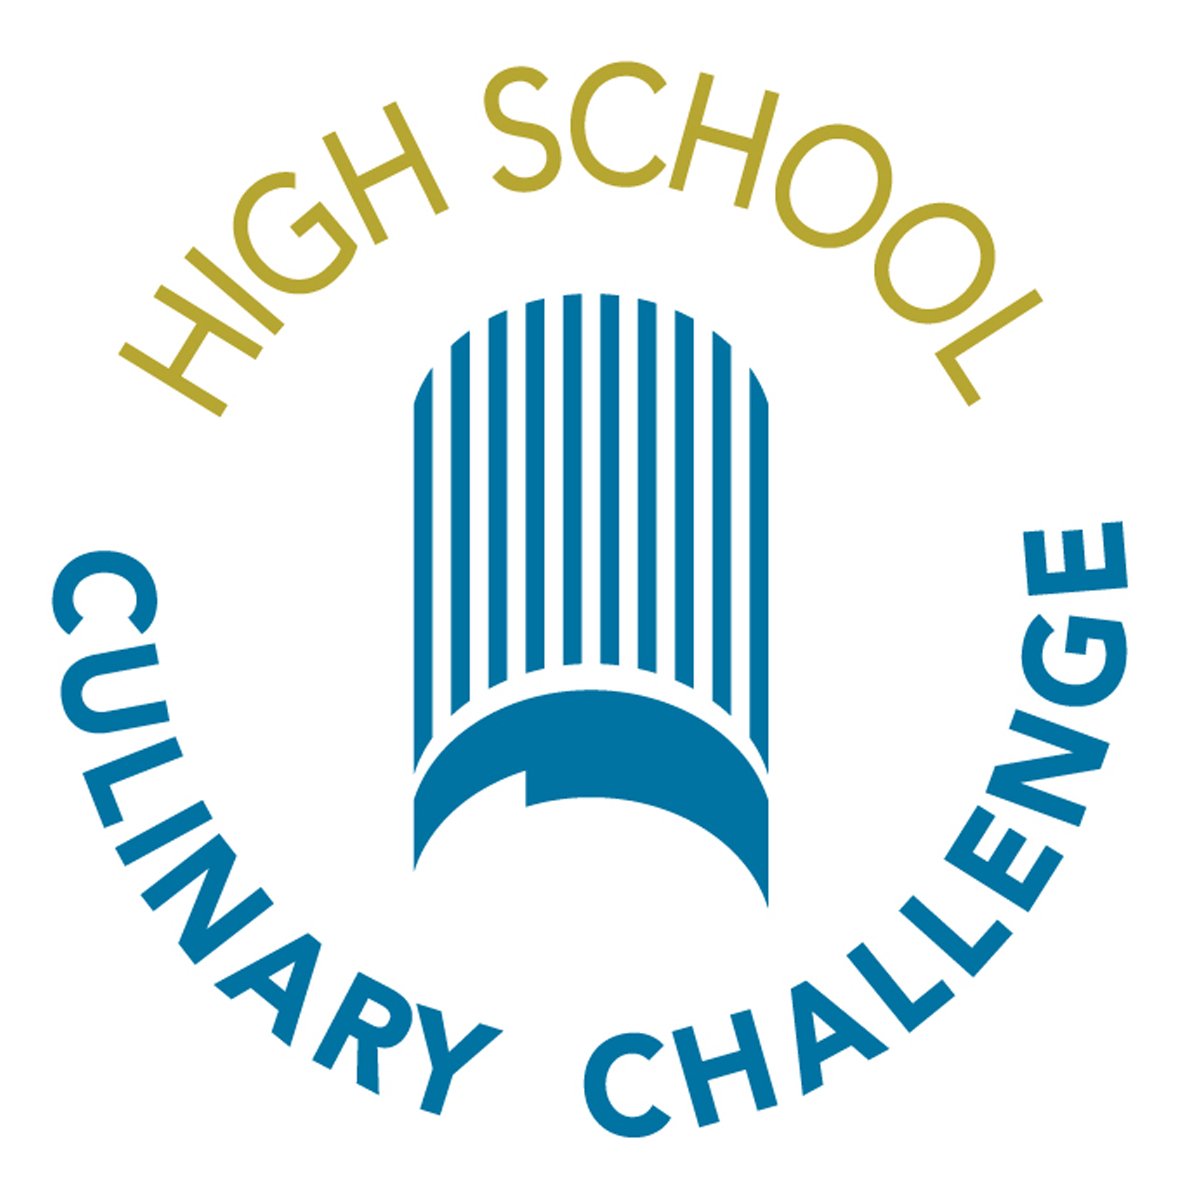 For the last 13 years, https://t.co/jFWqNAxehu High School Culinary Challenge has seen more than 105 high school teams turn up the heat in the kitchen & compete.